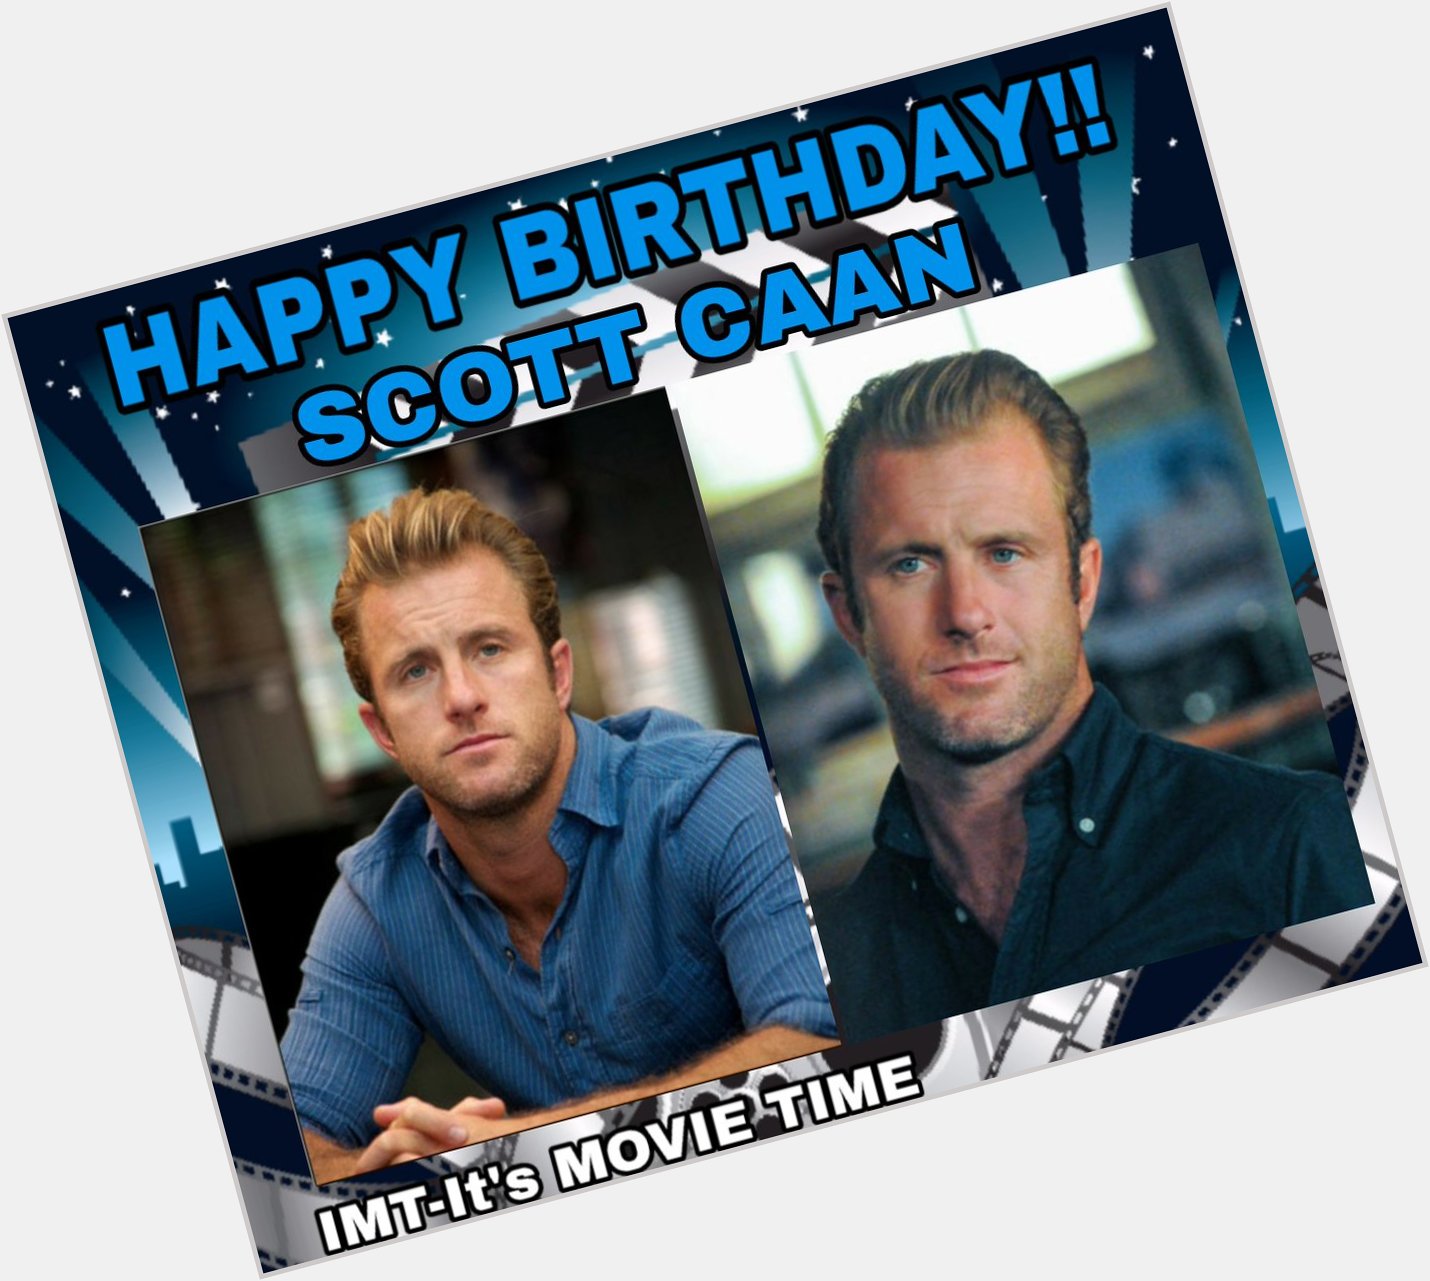 Happy Birthday to Scott Caan!
The actor is celebrating 44 years. 